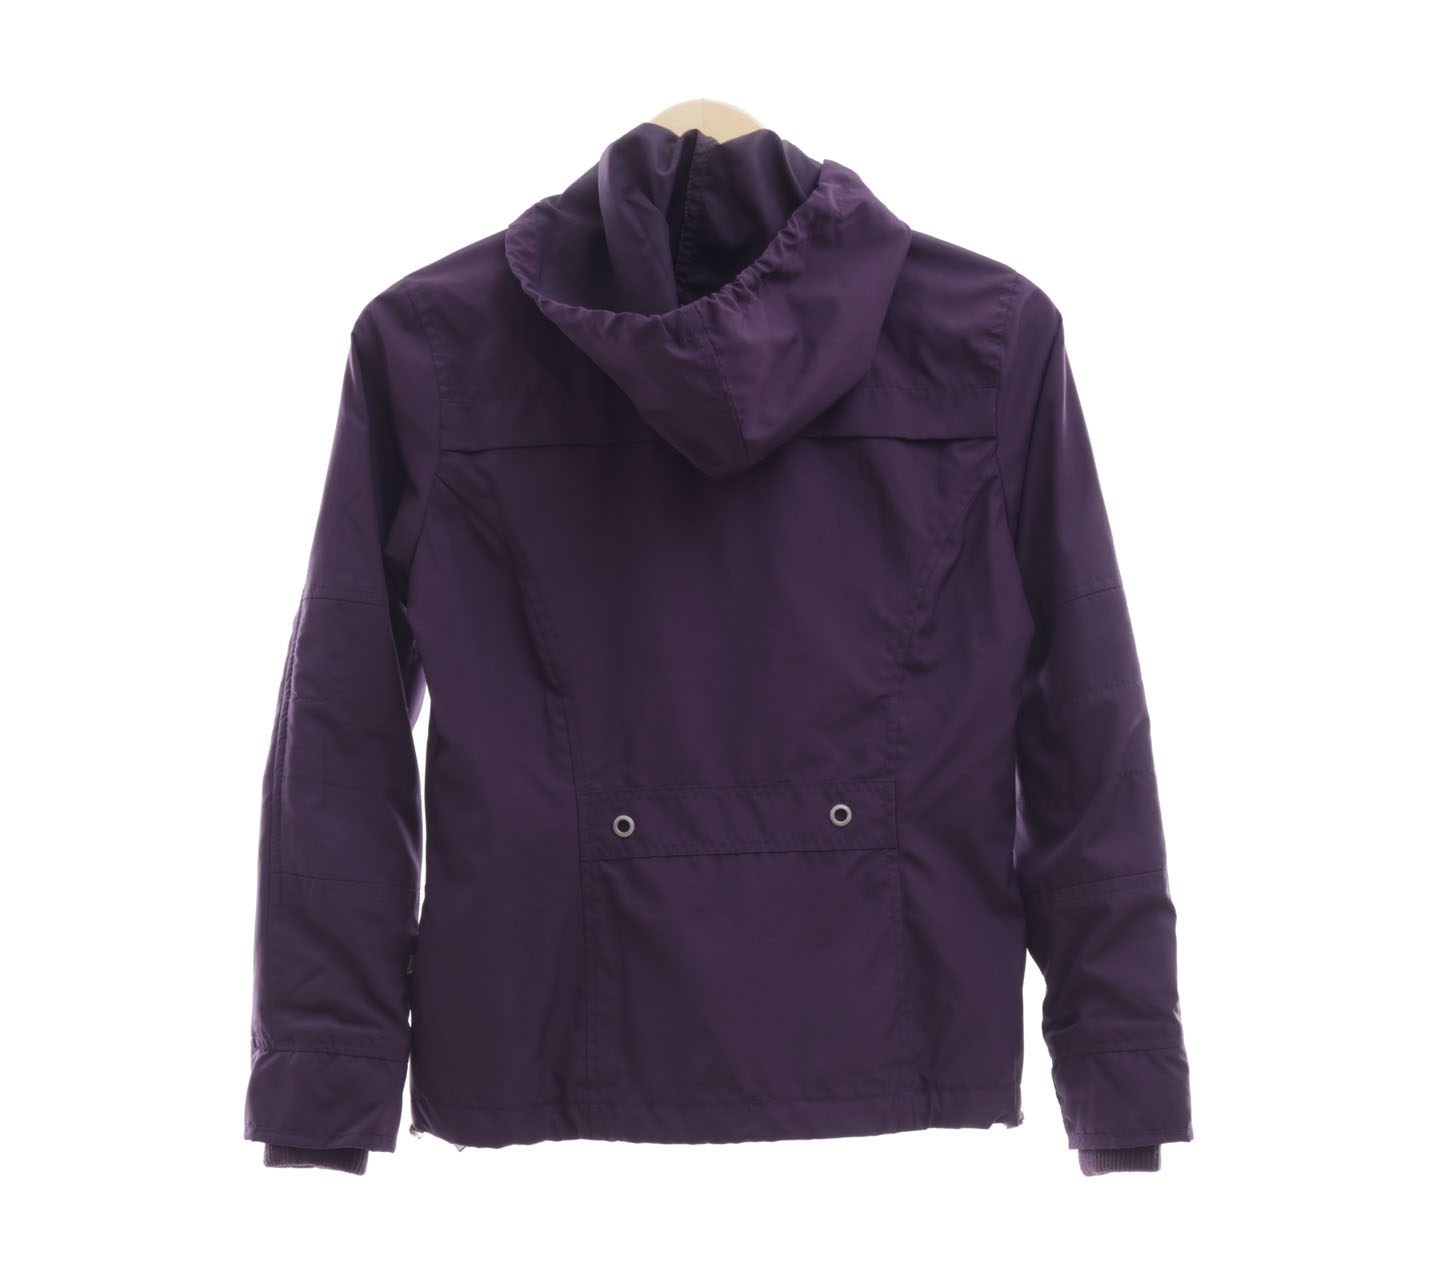 C2 Outfitters Purple Bikers Jacket